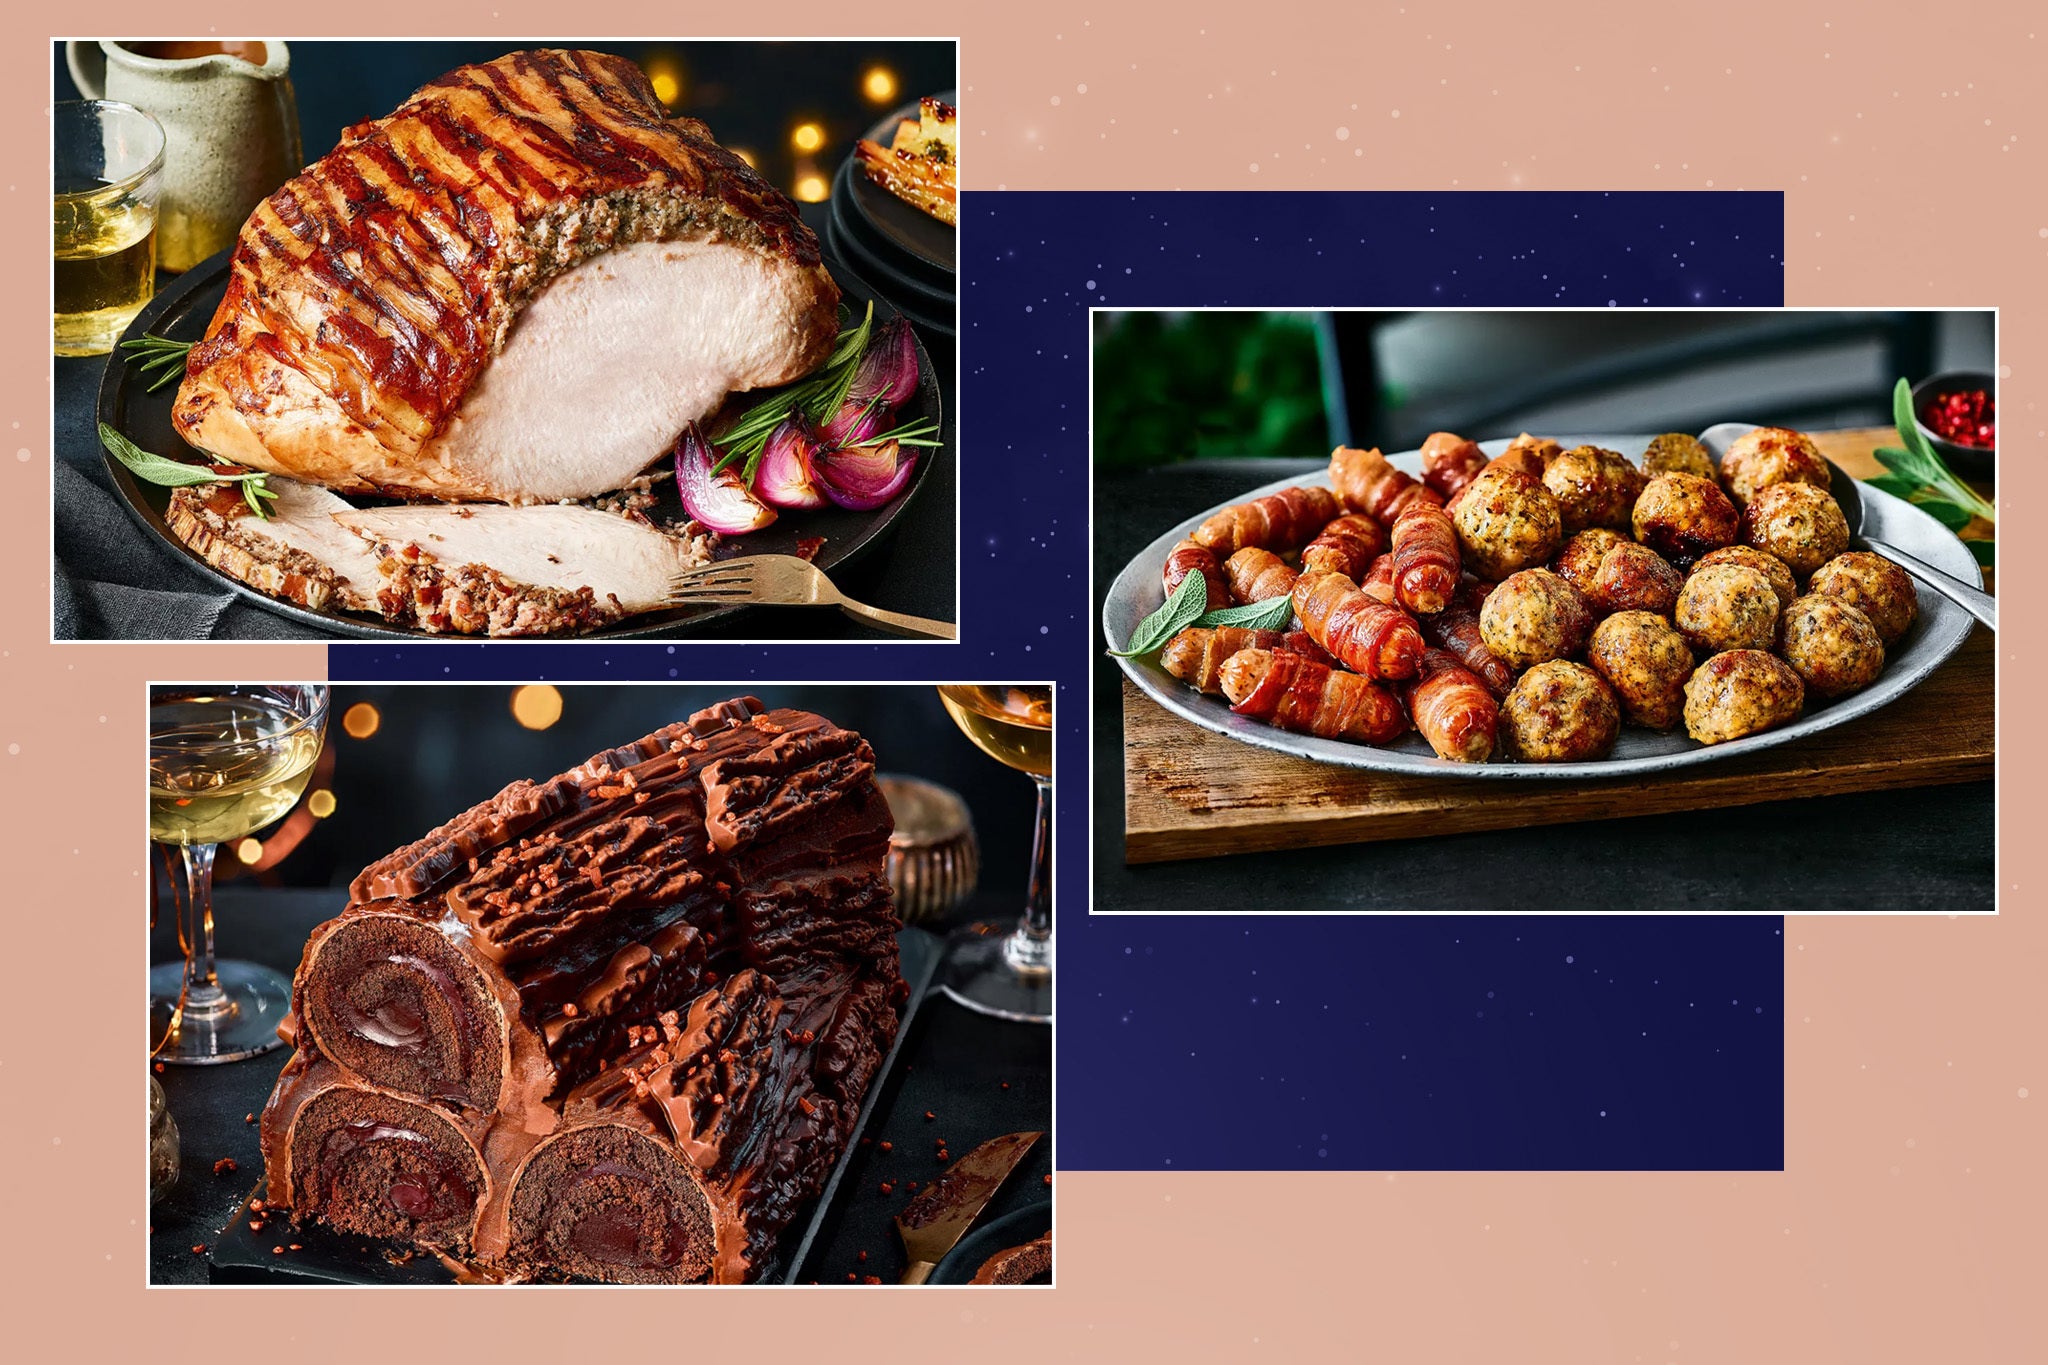 M&S’s festive food offering covers everything from turkey and trimmings to chocolate desserts